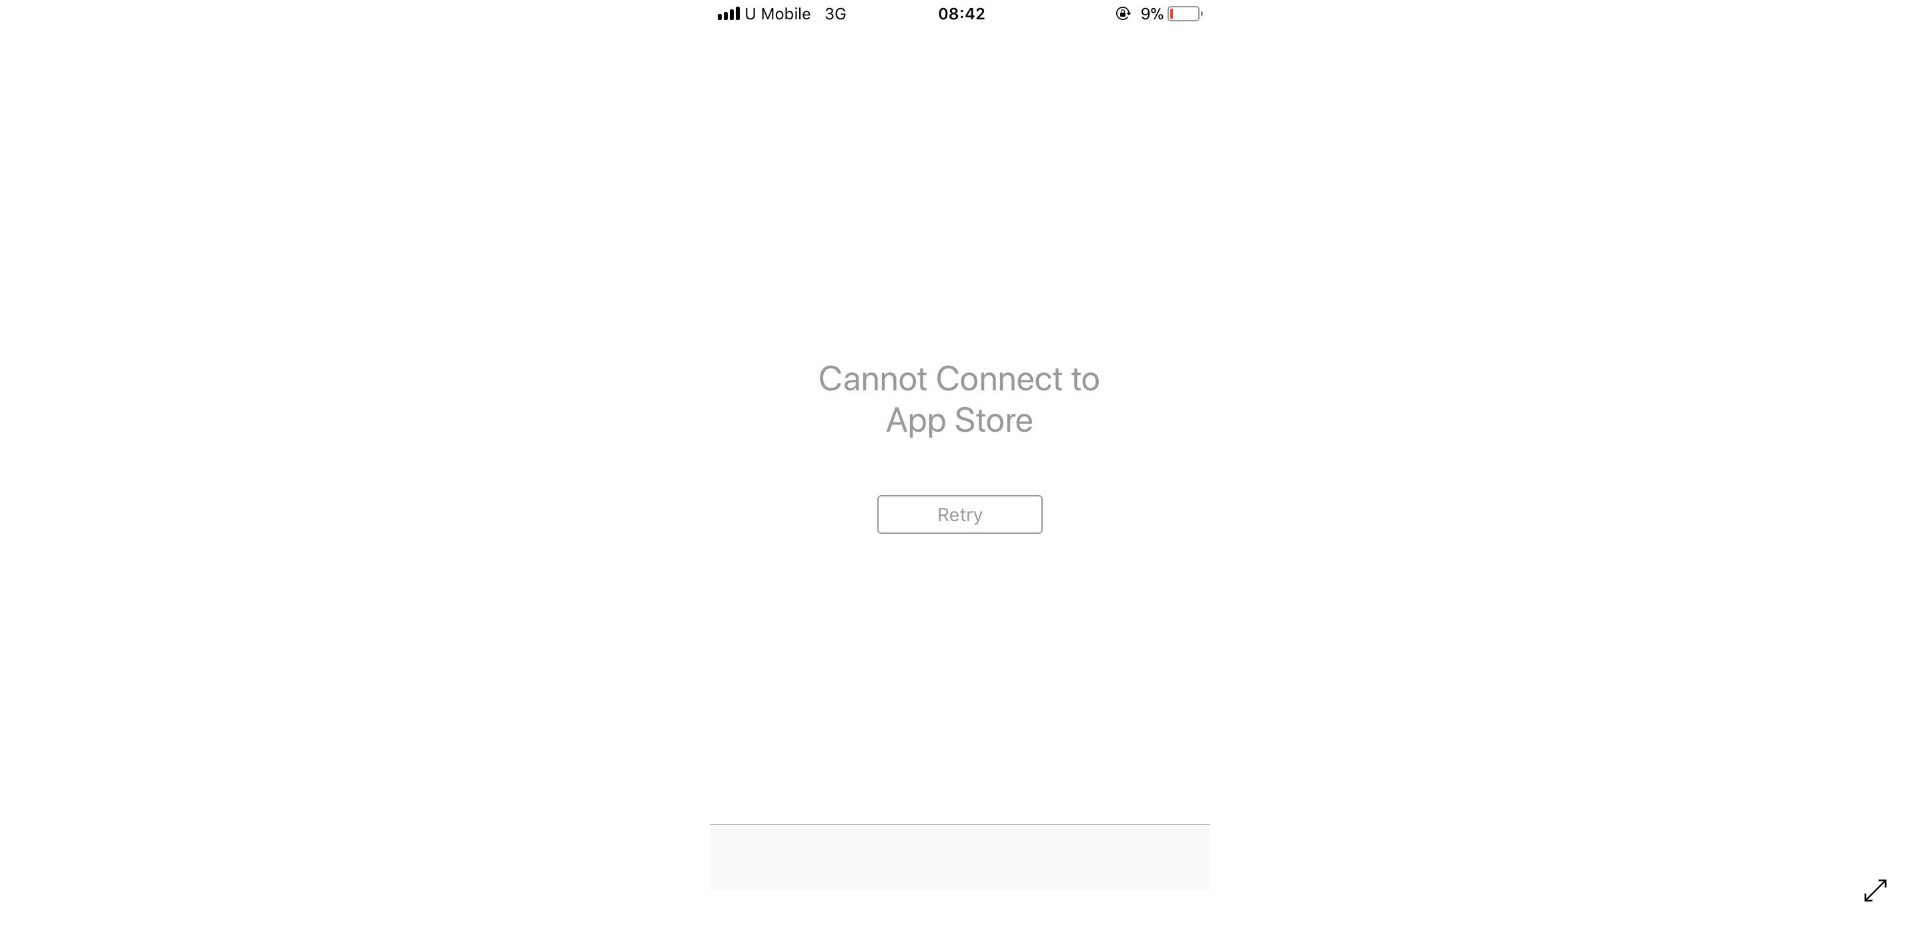 [Updated] App Store down and not working? Some users cannot connect to App Store